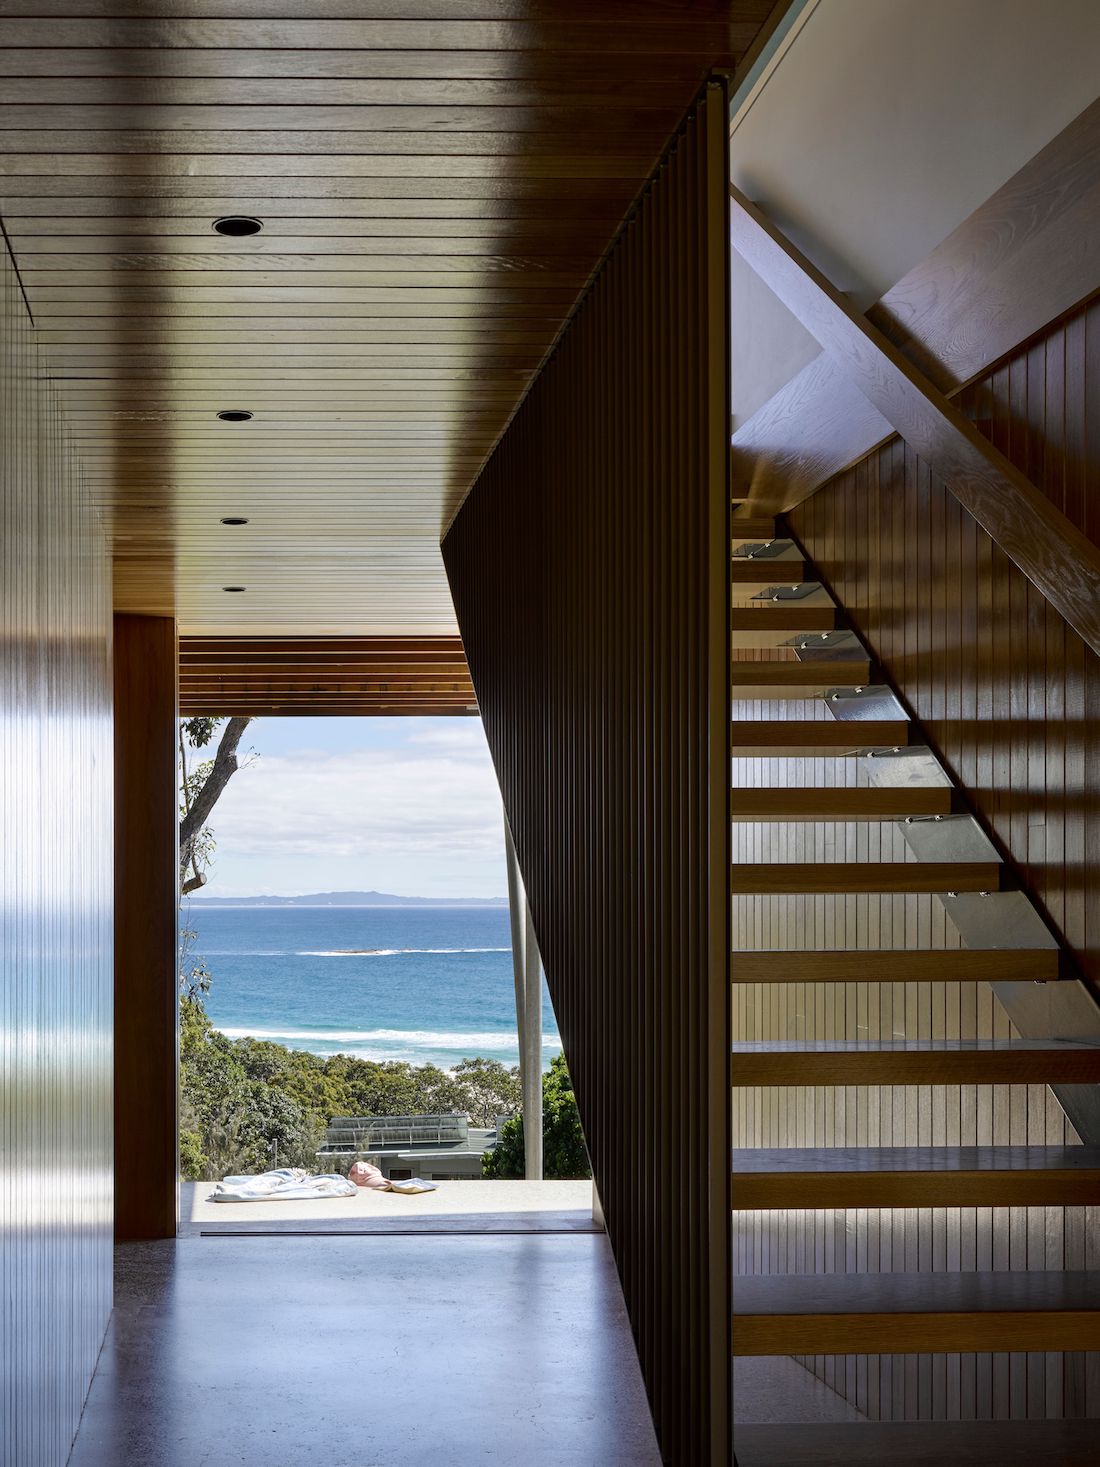 Staircase with a view in Nannygai